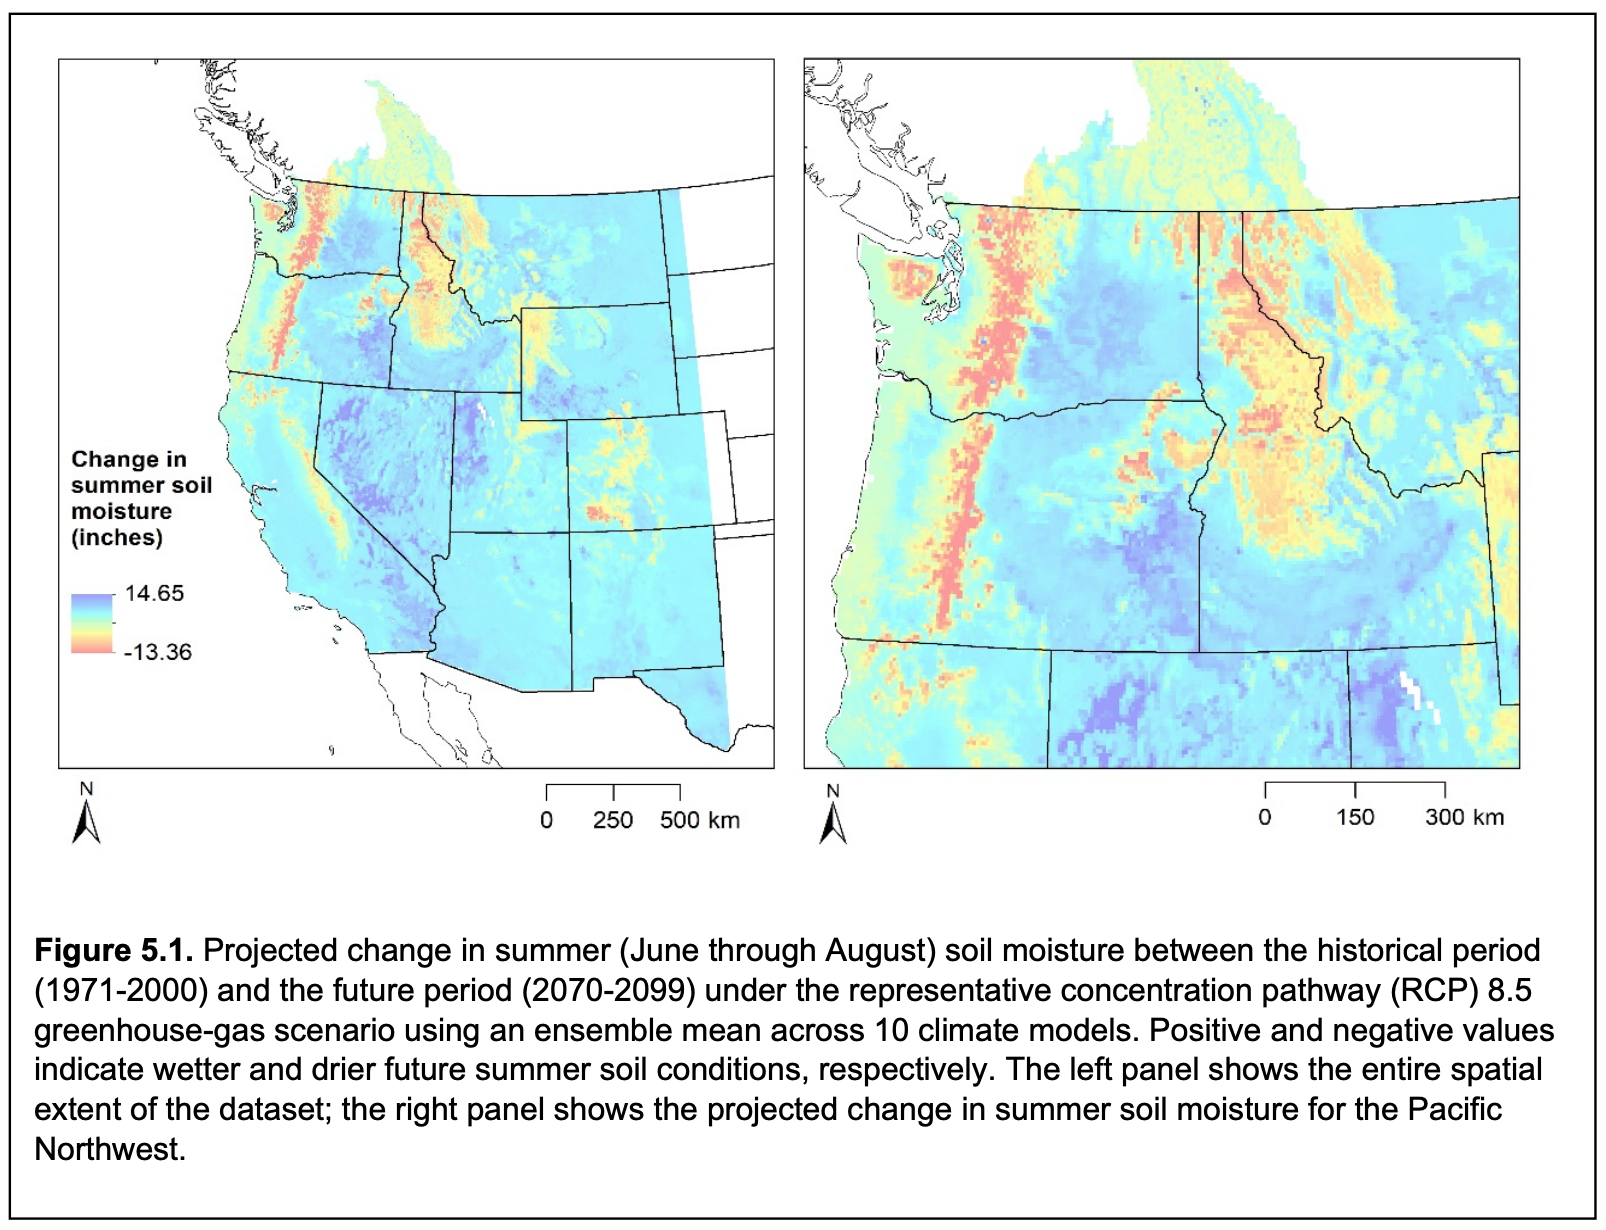 Chapter 5: Changes in snowpack, soil moisture, and fuel moisture